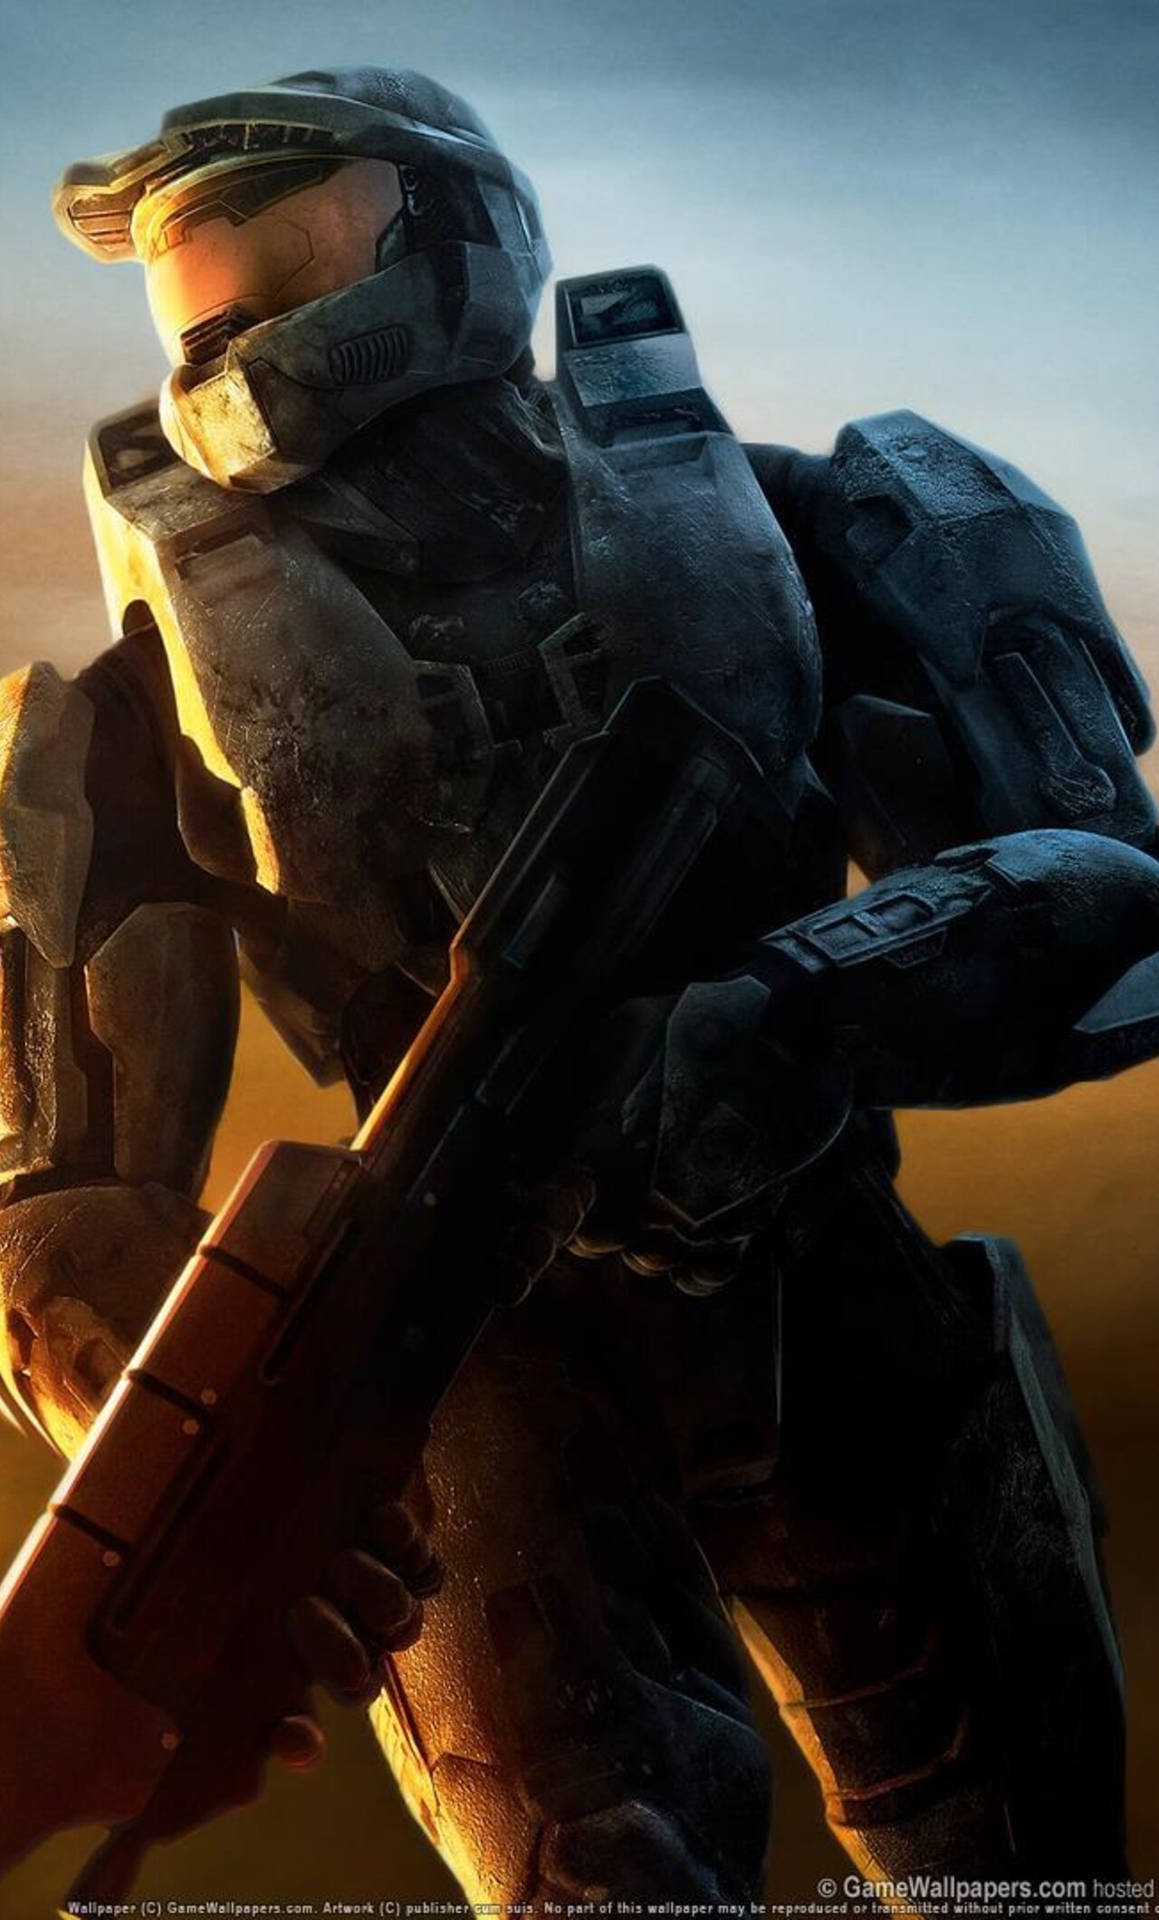 An Intense Moment In Halo 3 With Master Chief Battling Covenant Forces Wallpaper